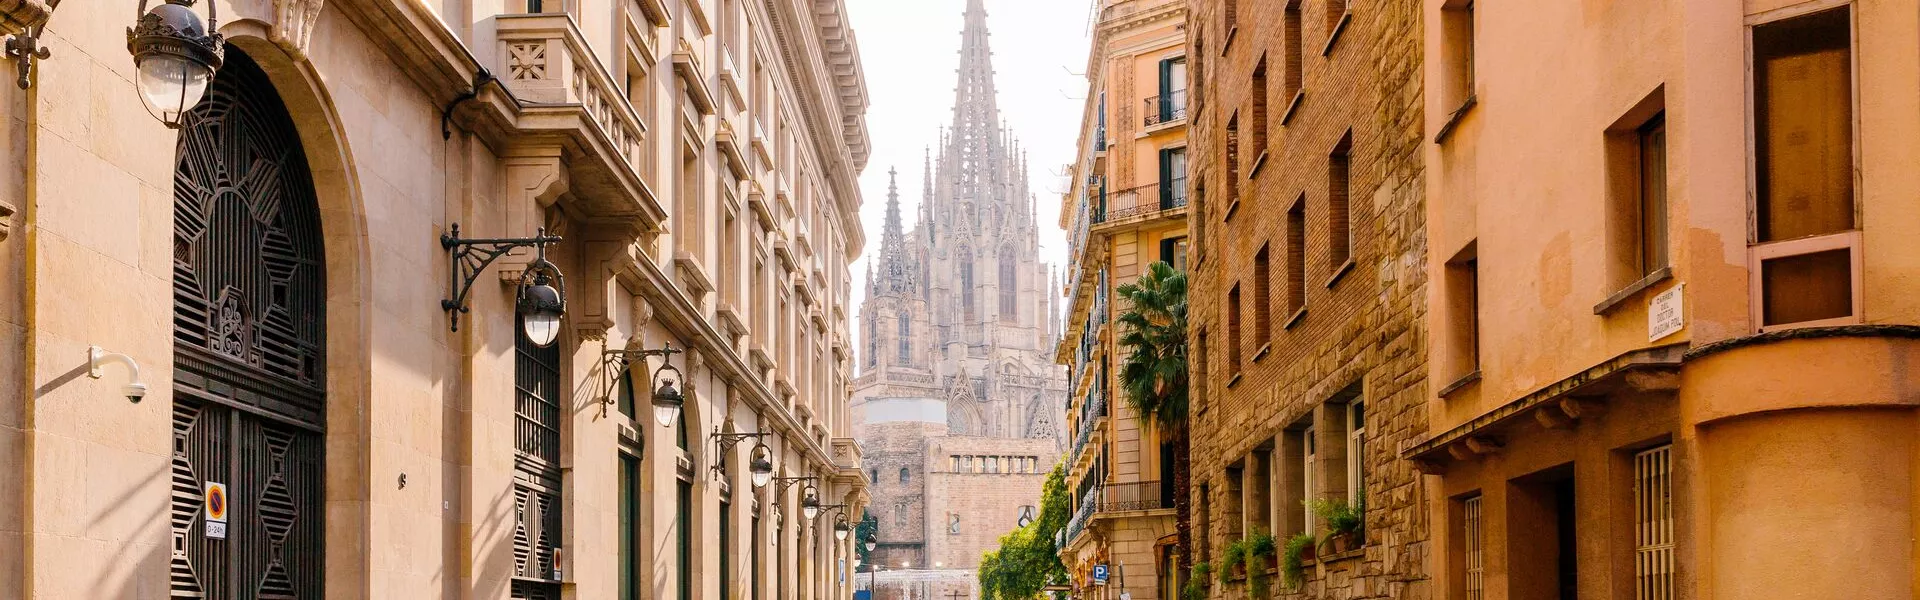 Large Street In Barcelona With Barcelona Cathedral In The Center, Barcelona, Spain 1192076179